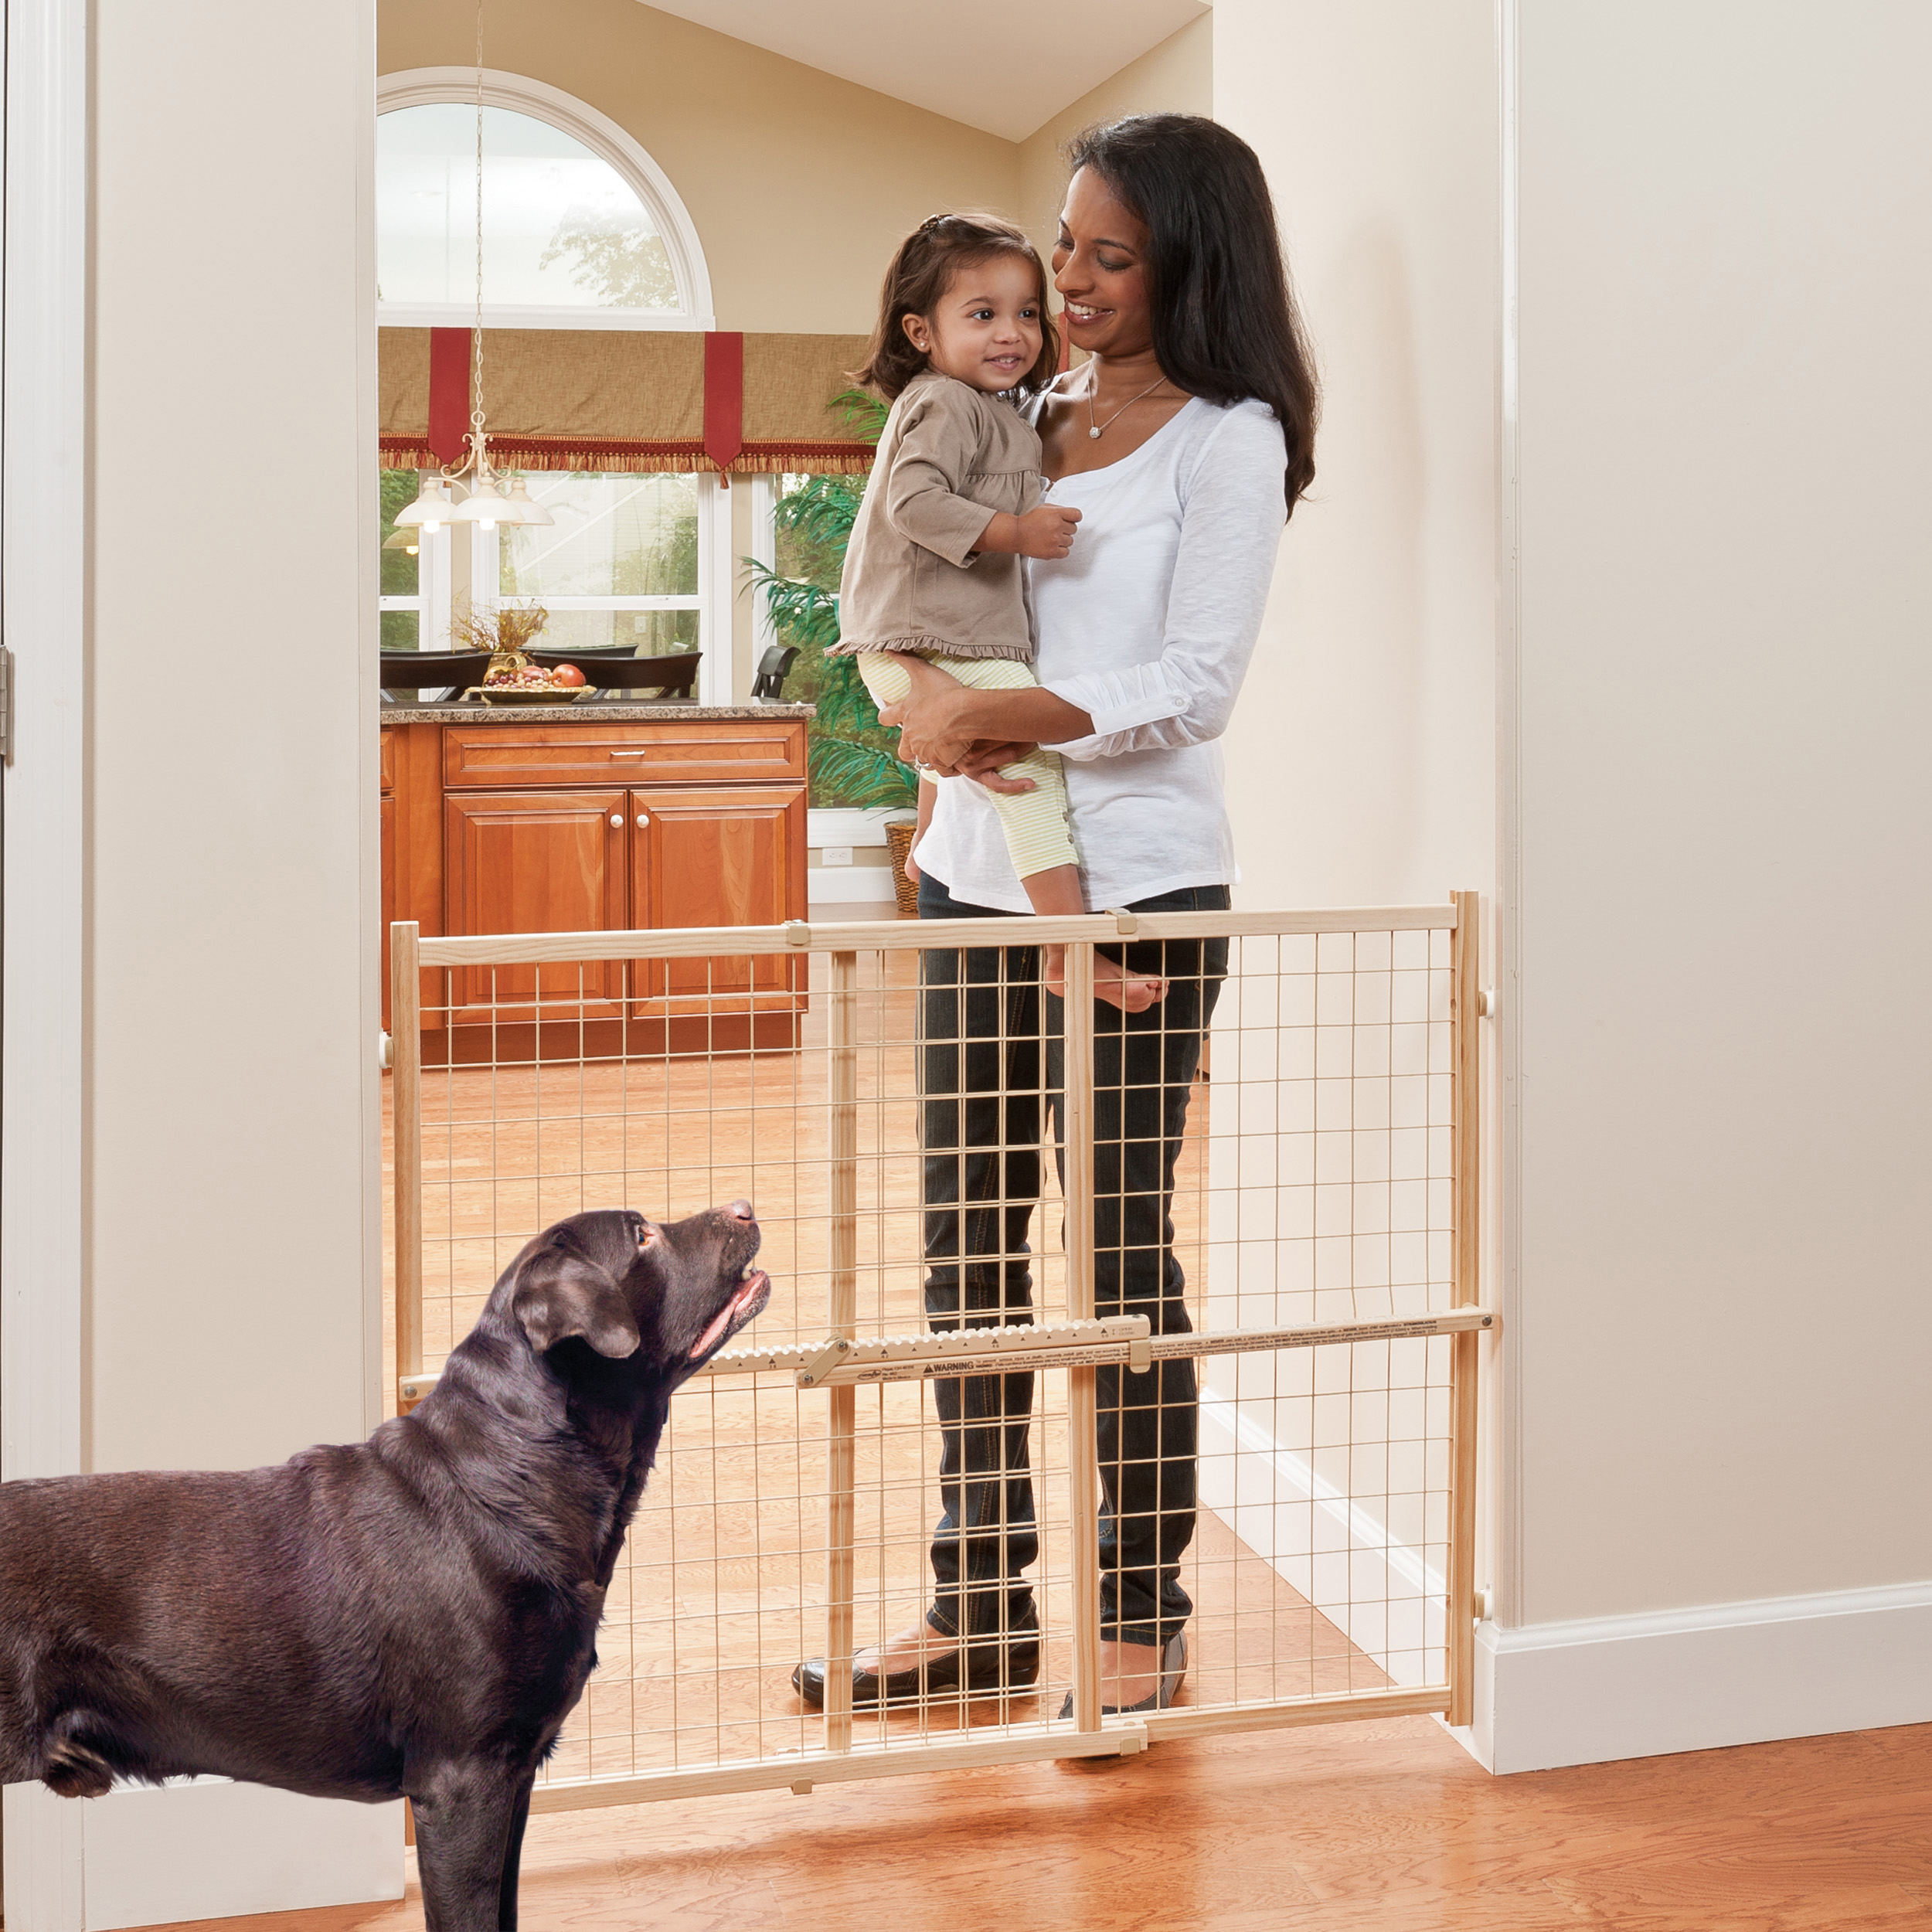 Evenflo Position & Lock Tall and Wide Value Adjustable Baby Gate, Pressure Mount, Locking Latch, For Use with Infants, Toddlers & Pets, 31" - 50", Natural Wood Baby Gate - image 1 of 7